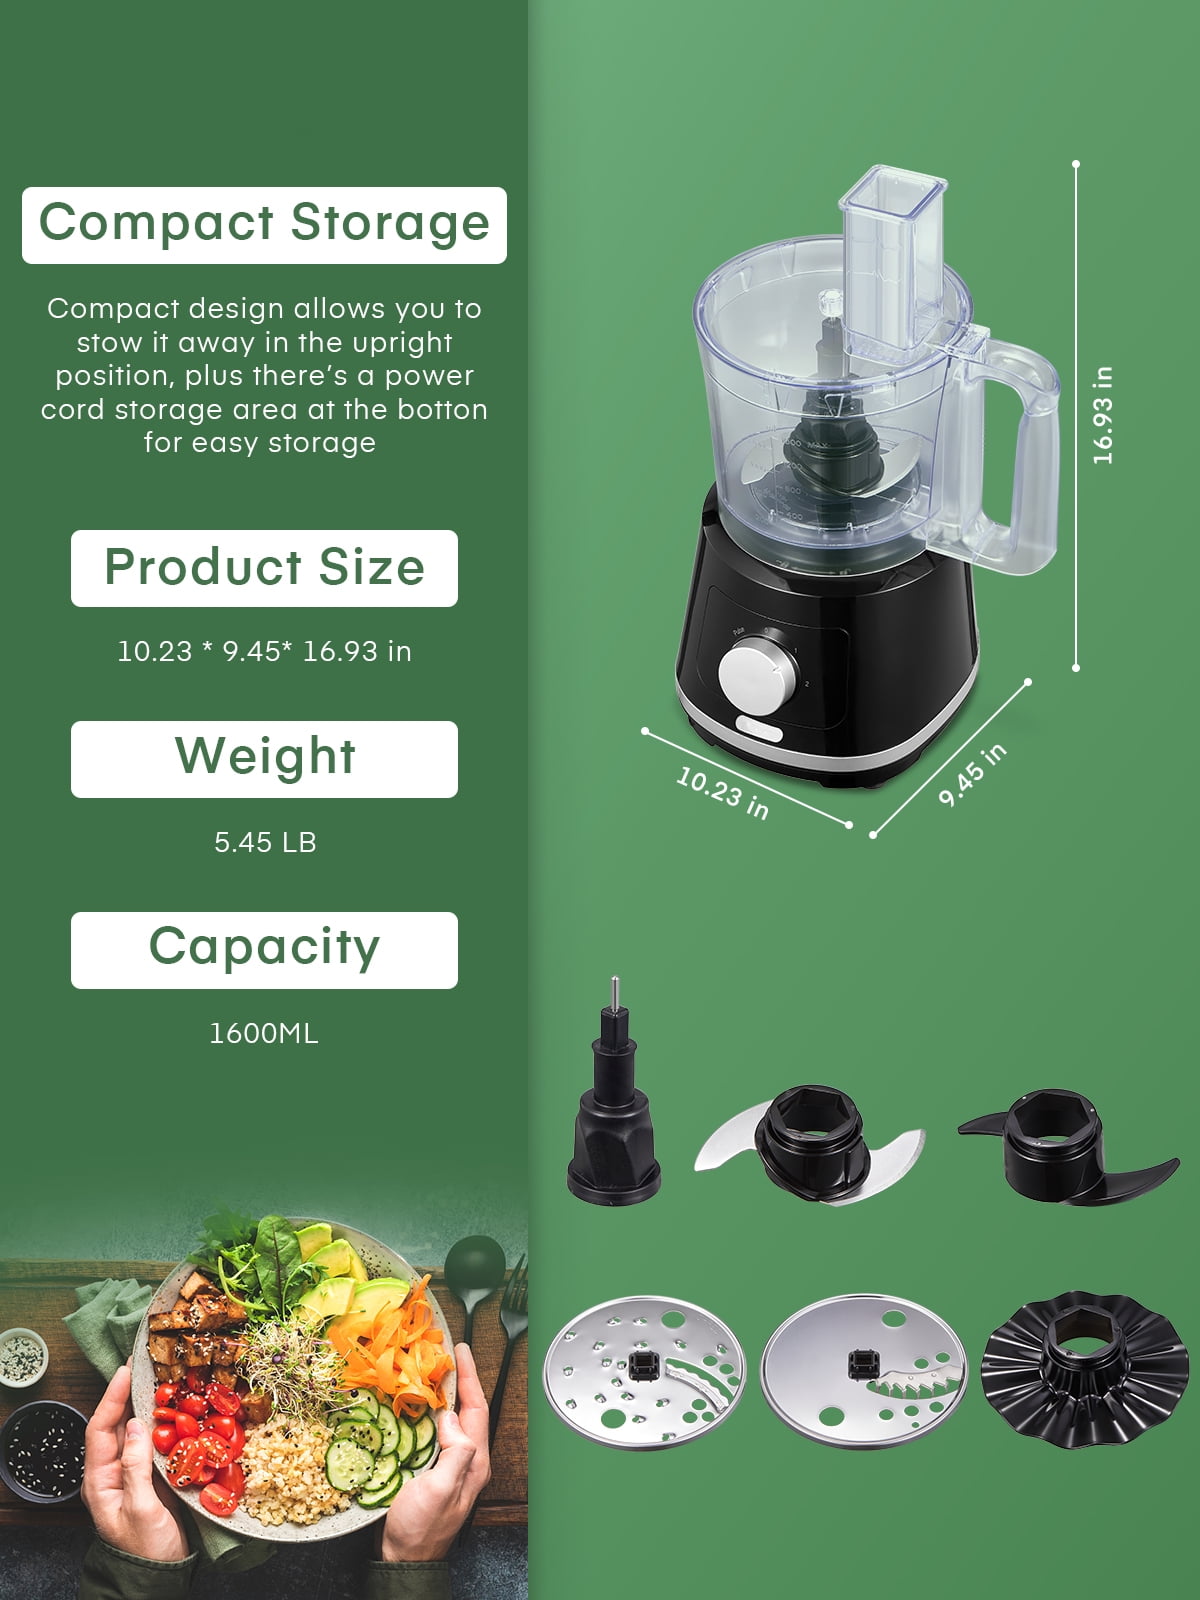 Food Processors,VASTELLE Electric Food Chopper with Bi-Level Blades, Meat Grinder and Vegetable Chopper for Baby Food, Meat, Onion, Nuts, 8 Cup